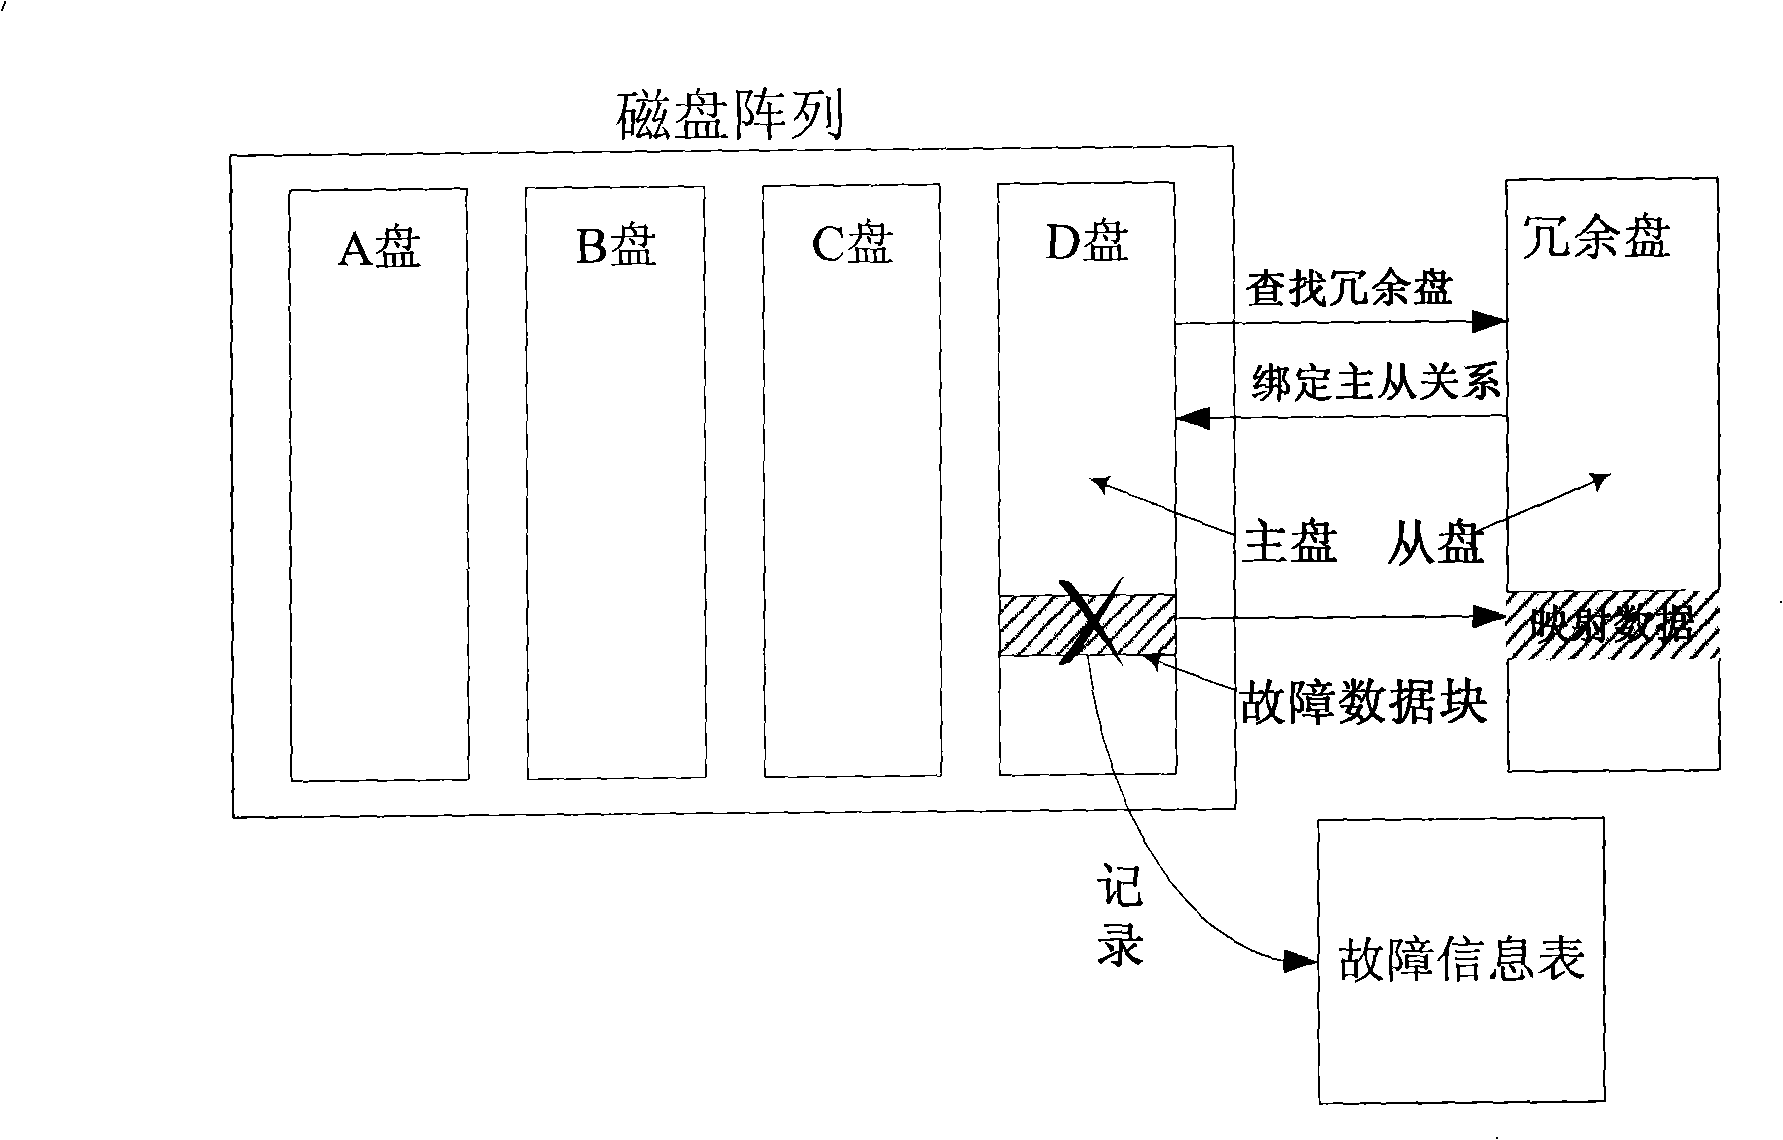 Magnetic disc fault processing and data restructuring method in magnetic disc array system